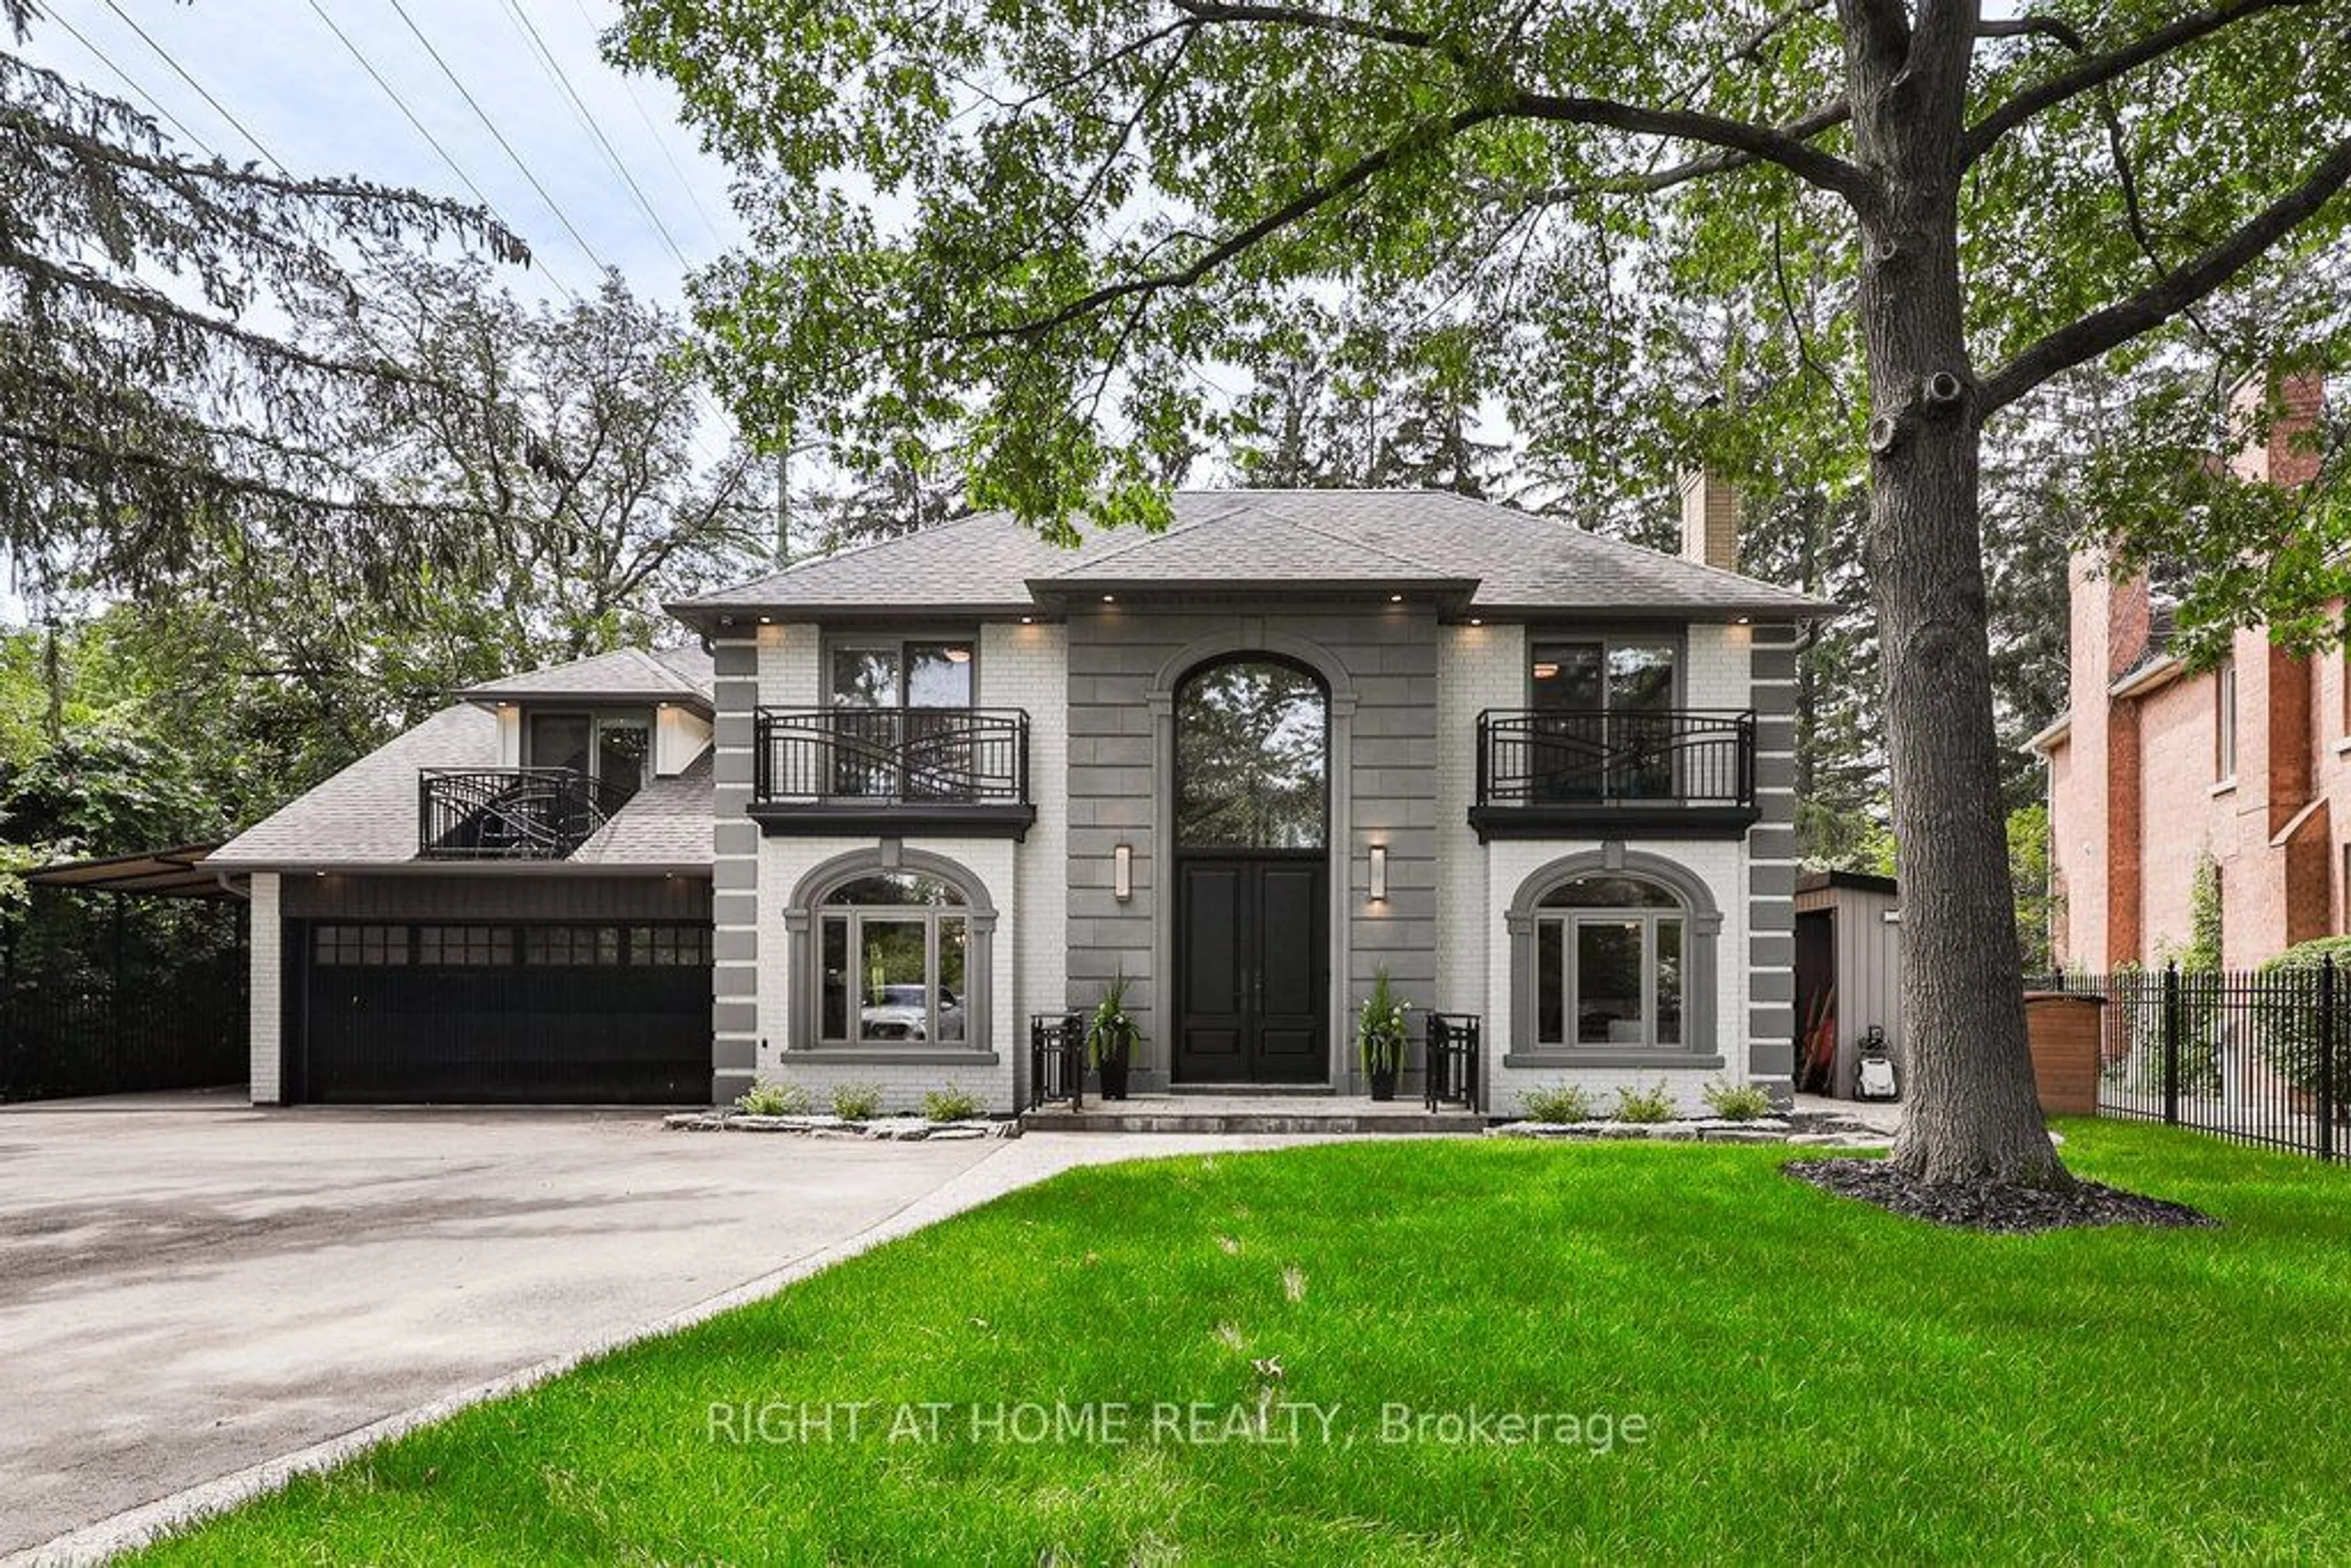 Home with brick exterior material for 1420 Lorne Park Rd, Mississauga Ontario L5H 3B3